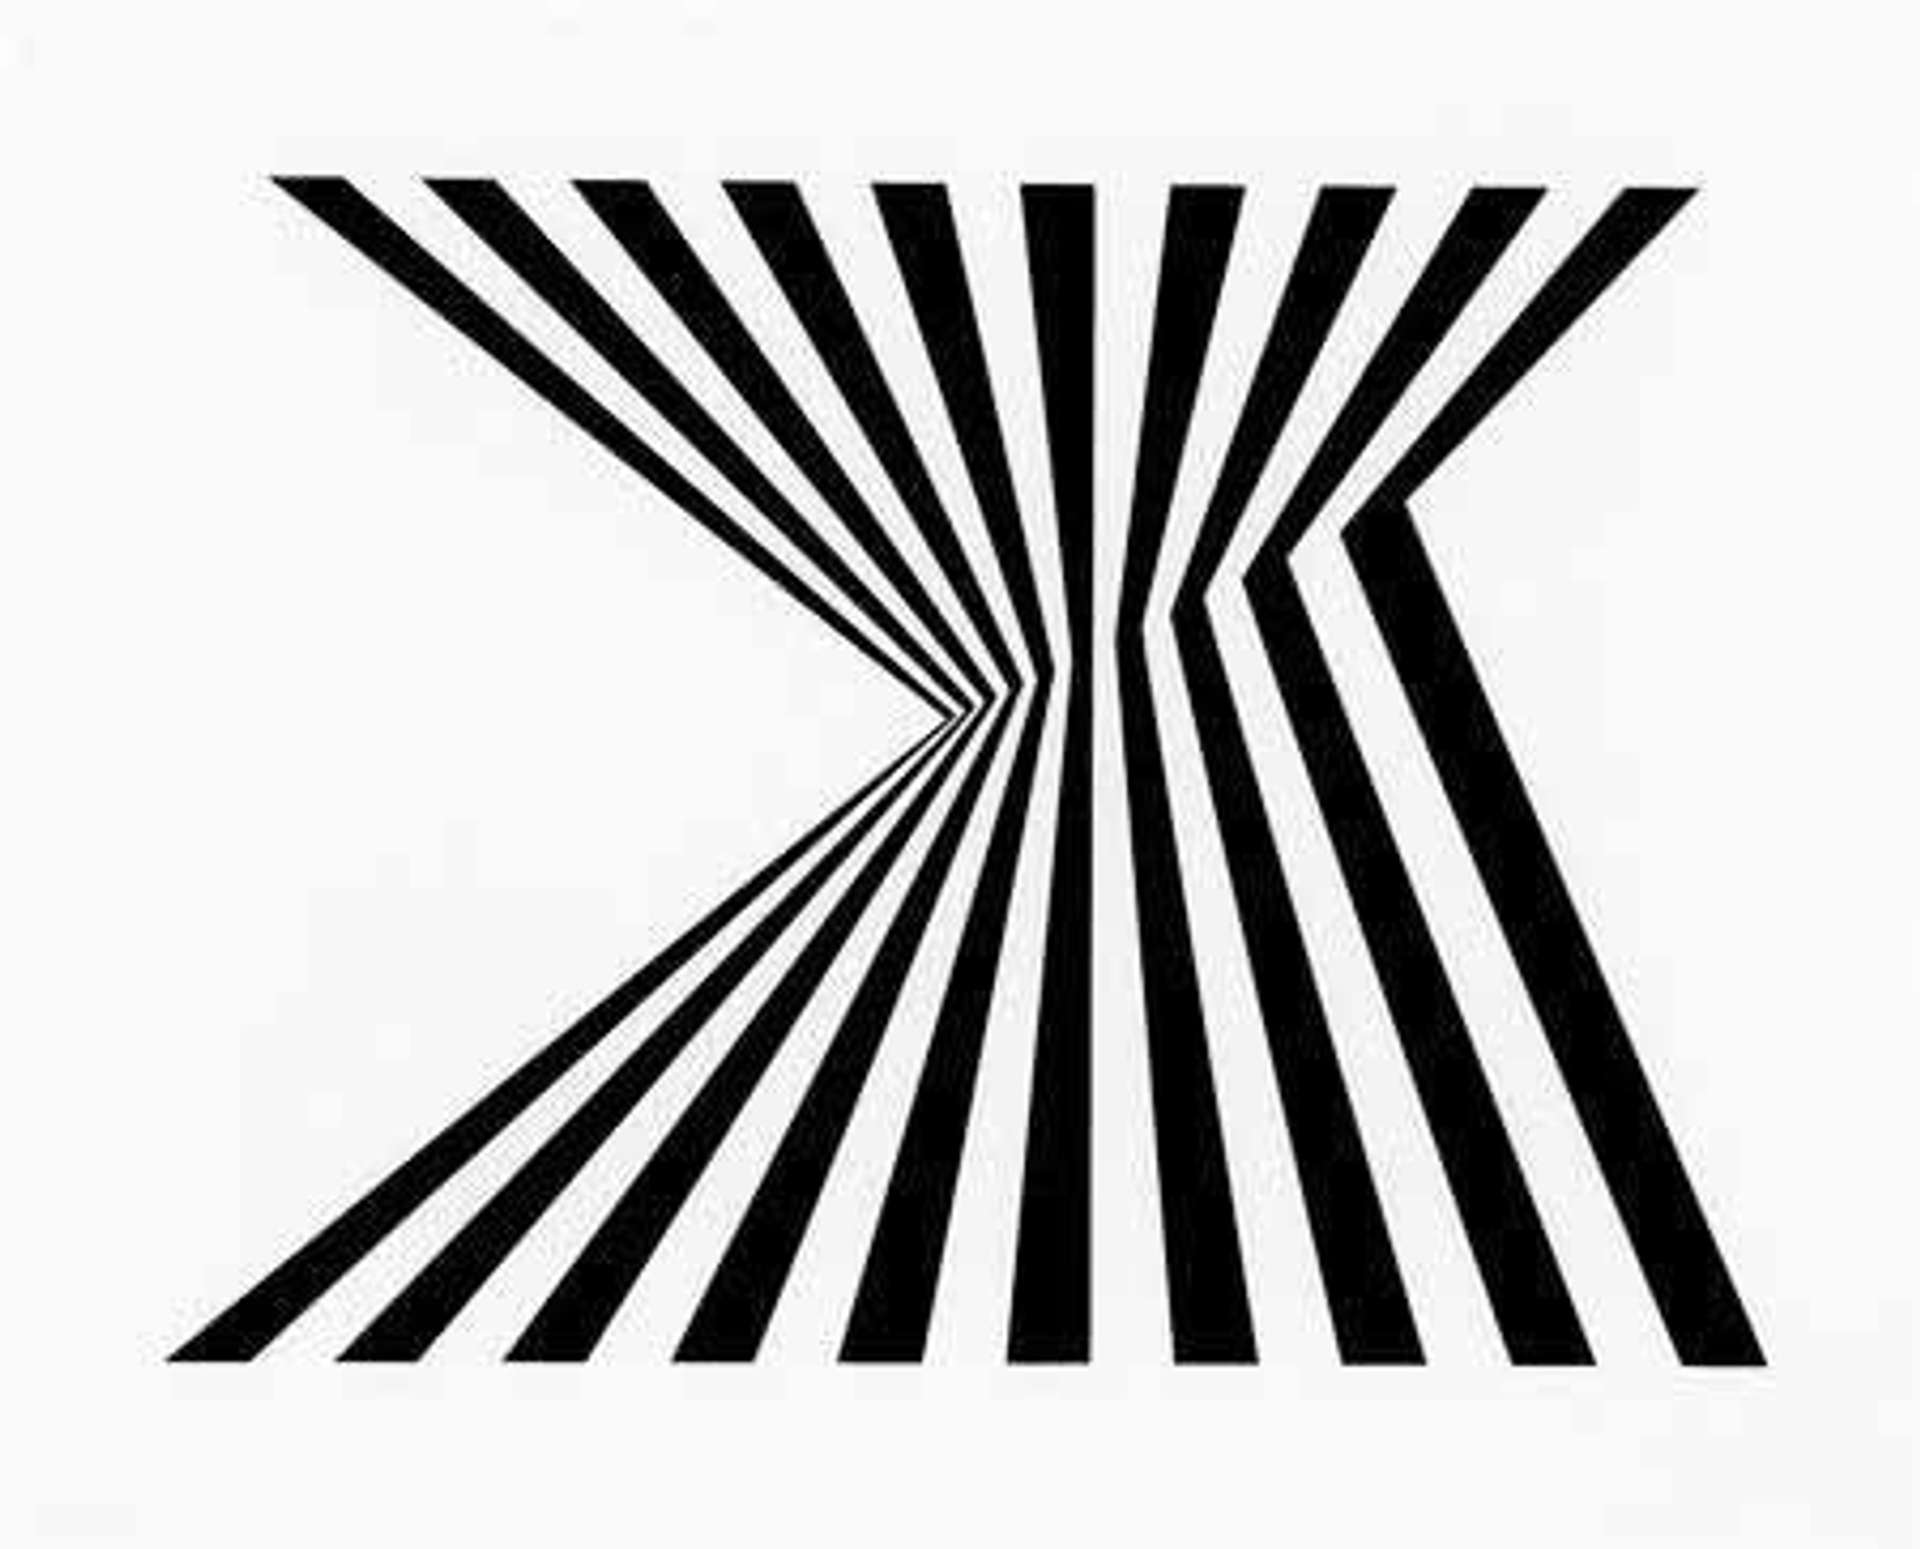 10 Facts About Bridget Riley's Fragment